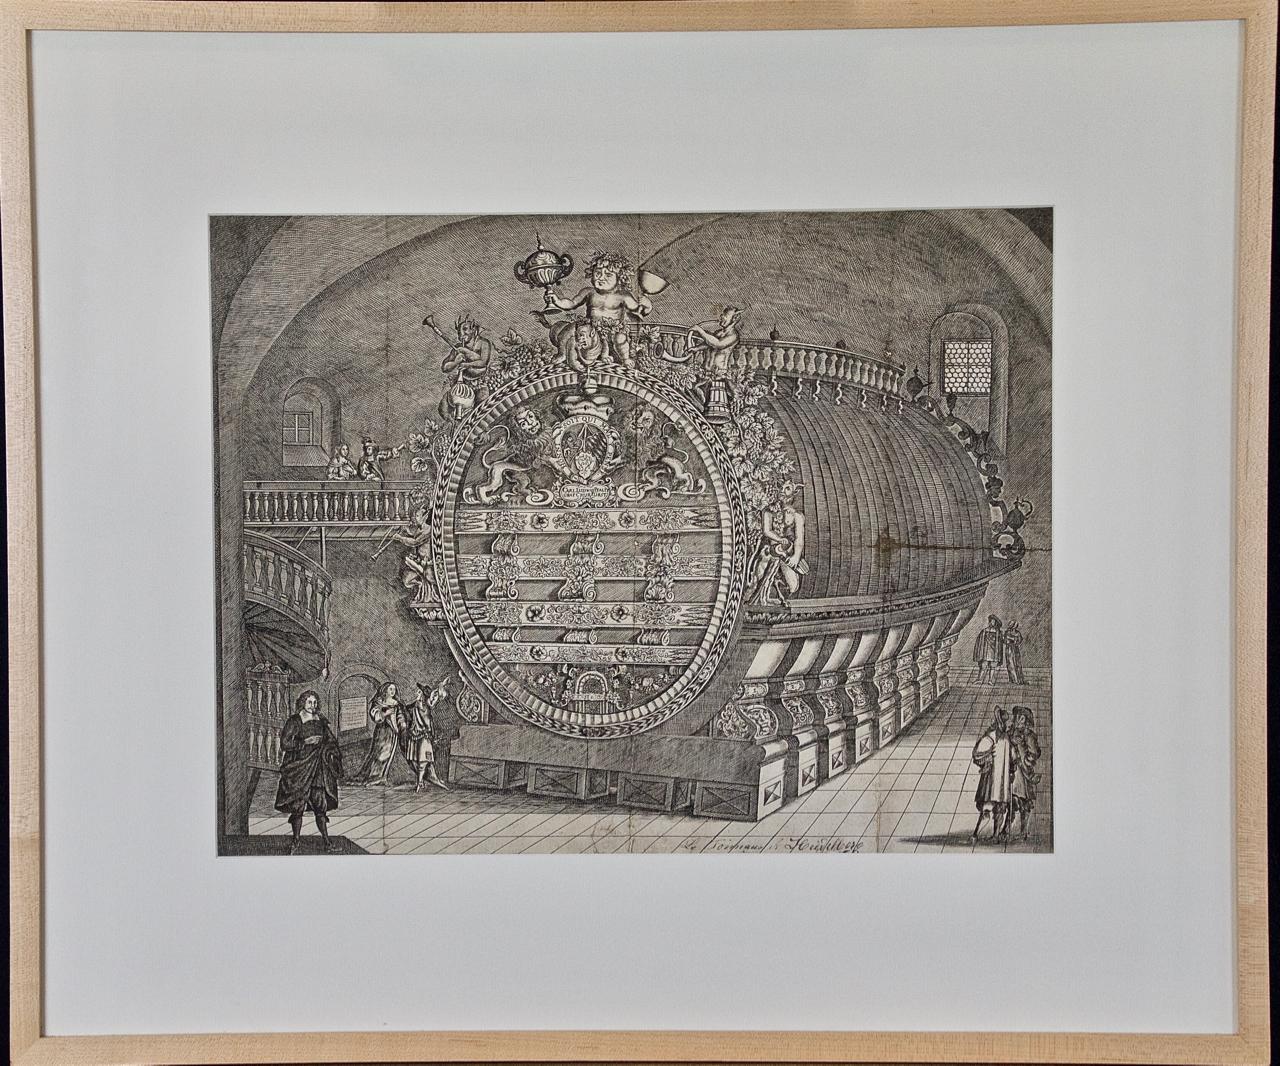 The Heidelberg Tun: A Framed 17th Century Engraving of a Huge Wine Cask